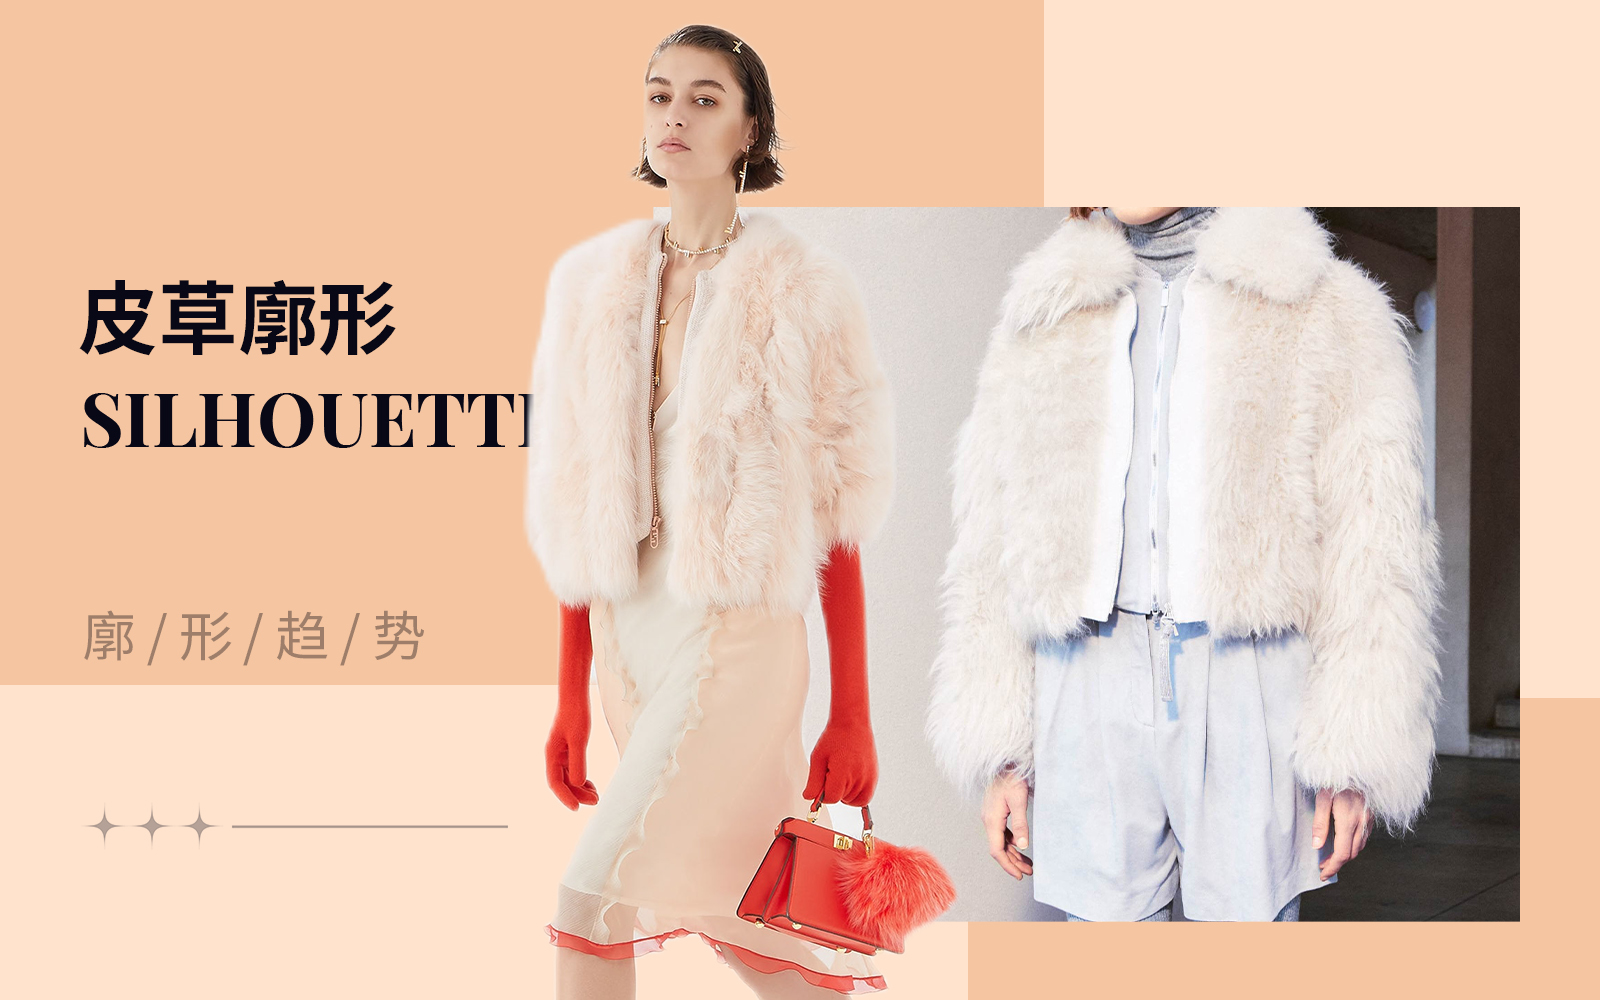 Warm Wool -- The Silhouette Trend for Women's Leather & Fur